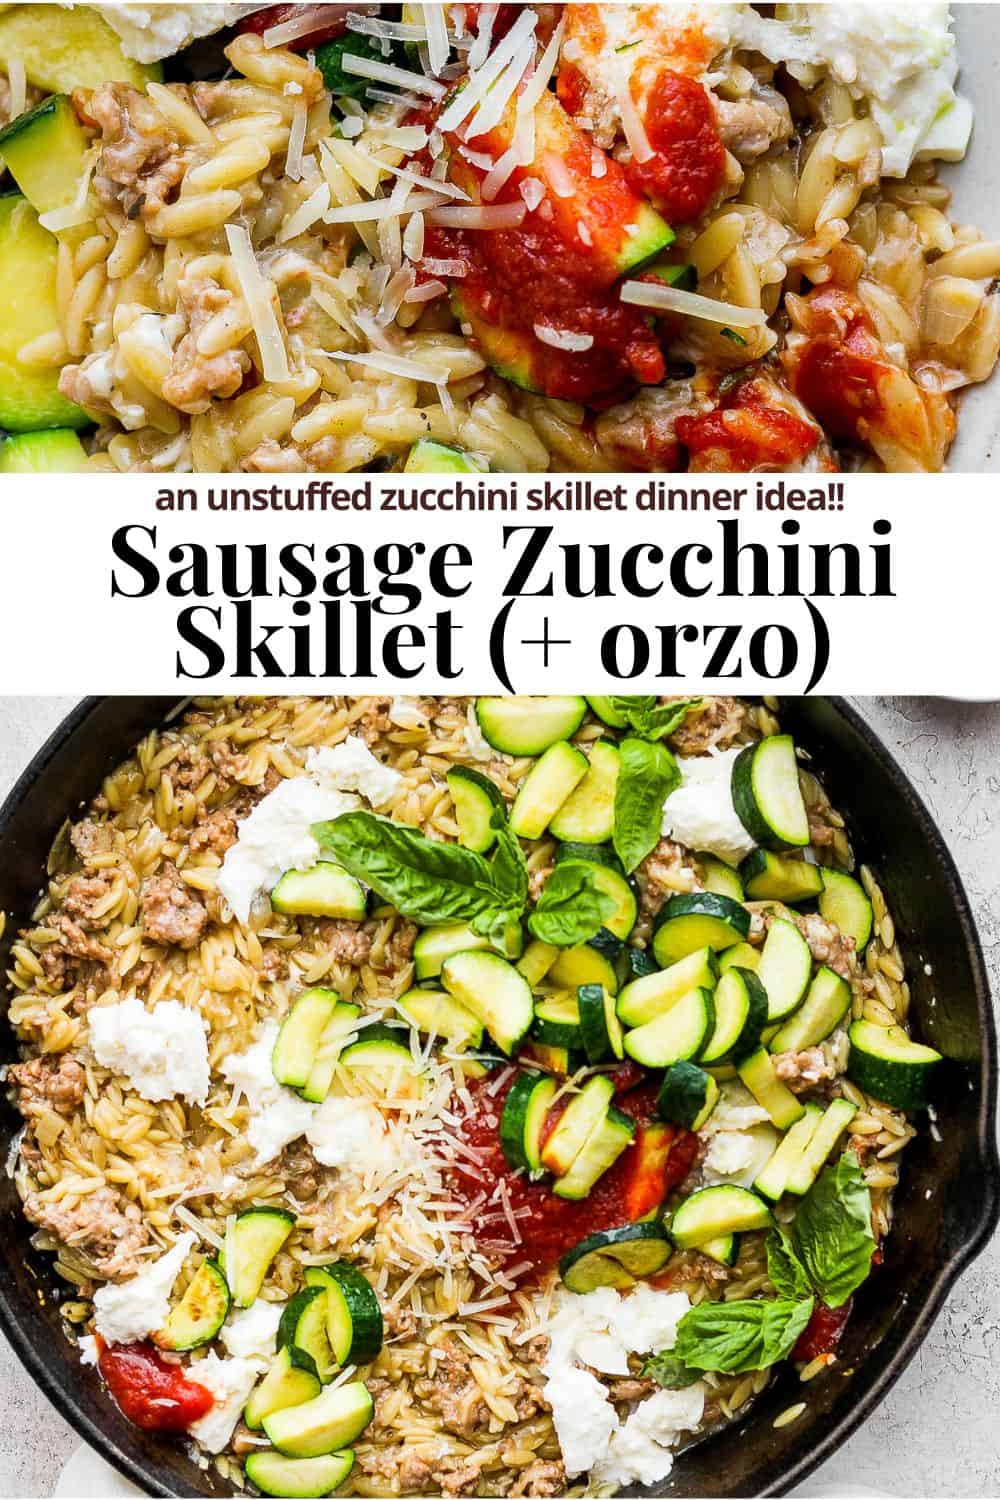 Pinterest image for sausage zuchhini skillet + orzo.